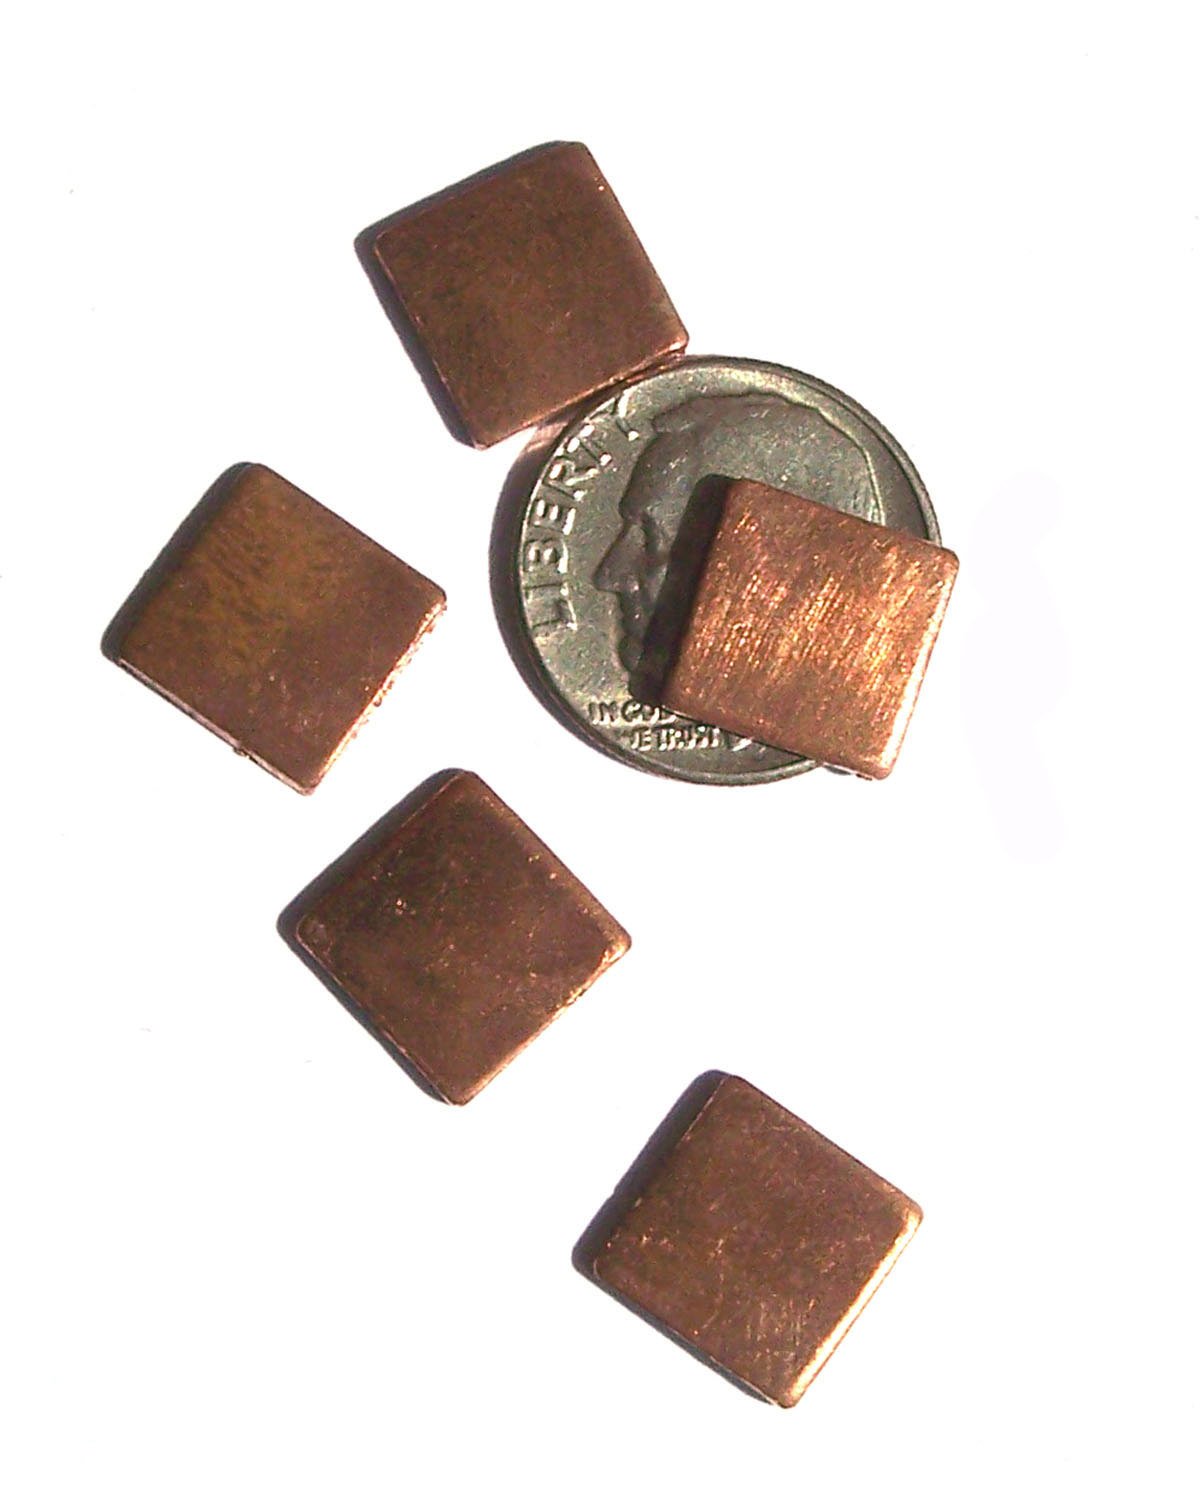 Copper Squares Blank 10mm for Enameling Stamping Texturing - 8 pieces